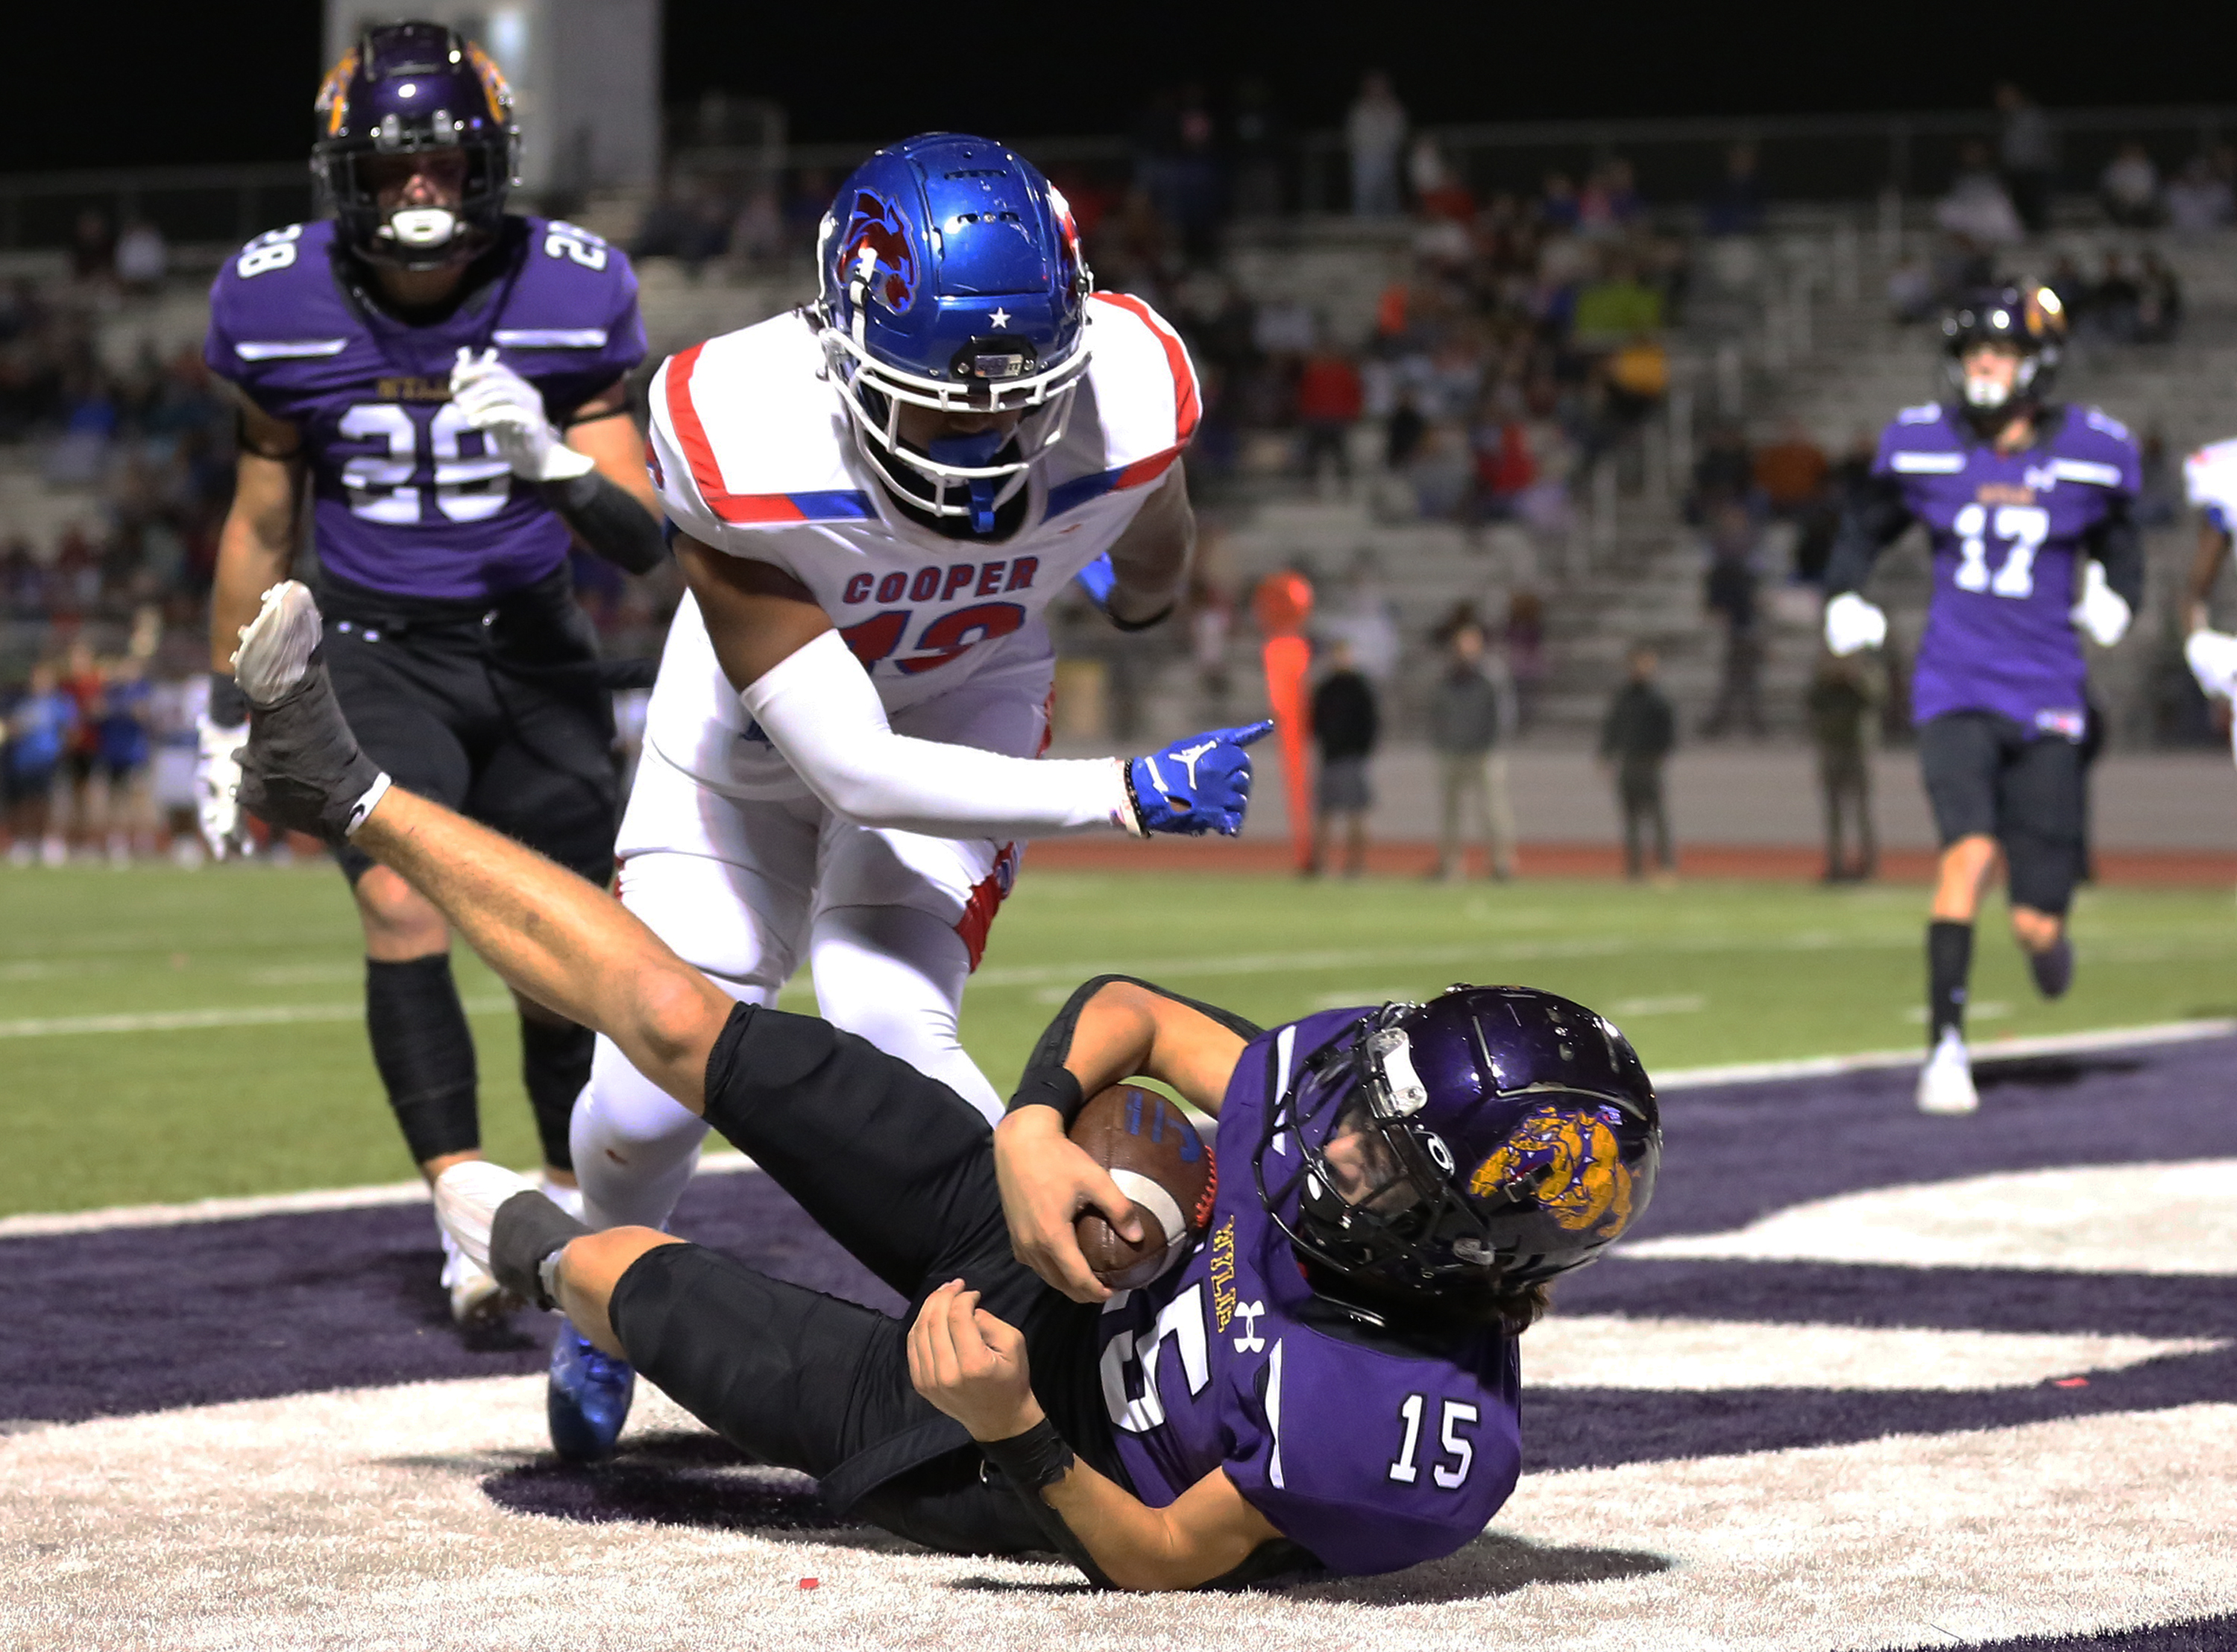 Abilene Wylie claimed its first district title in Texas Class 5A football on November 4, 2022 by defeating cross-town rival Abilene Cooper 20-10.